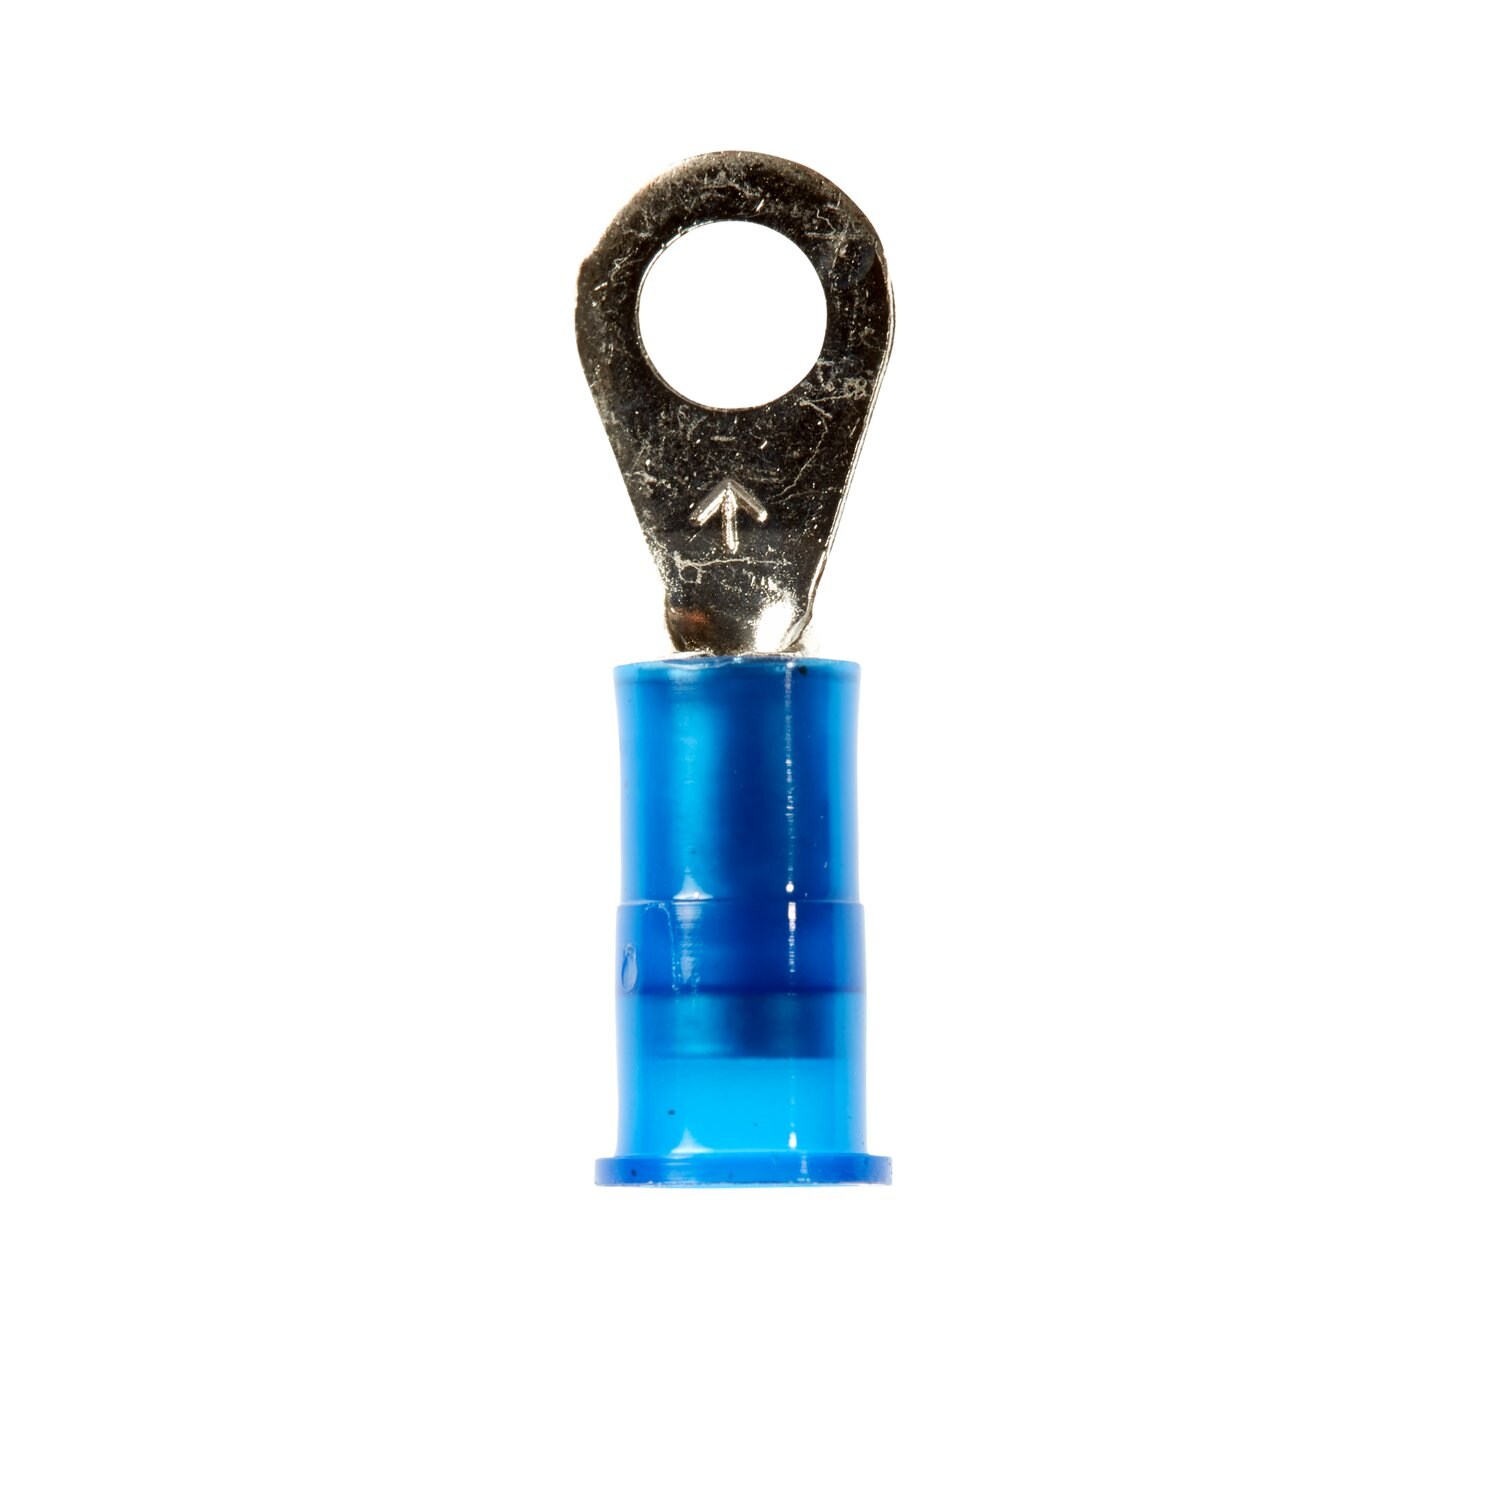 7100164003 - 3M Scotchlok Ring Tongue, Nylon Insulated w/Insulation Grip
MNG14-8R/LK, Stud Size 8, 1000/Case